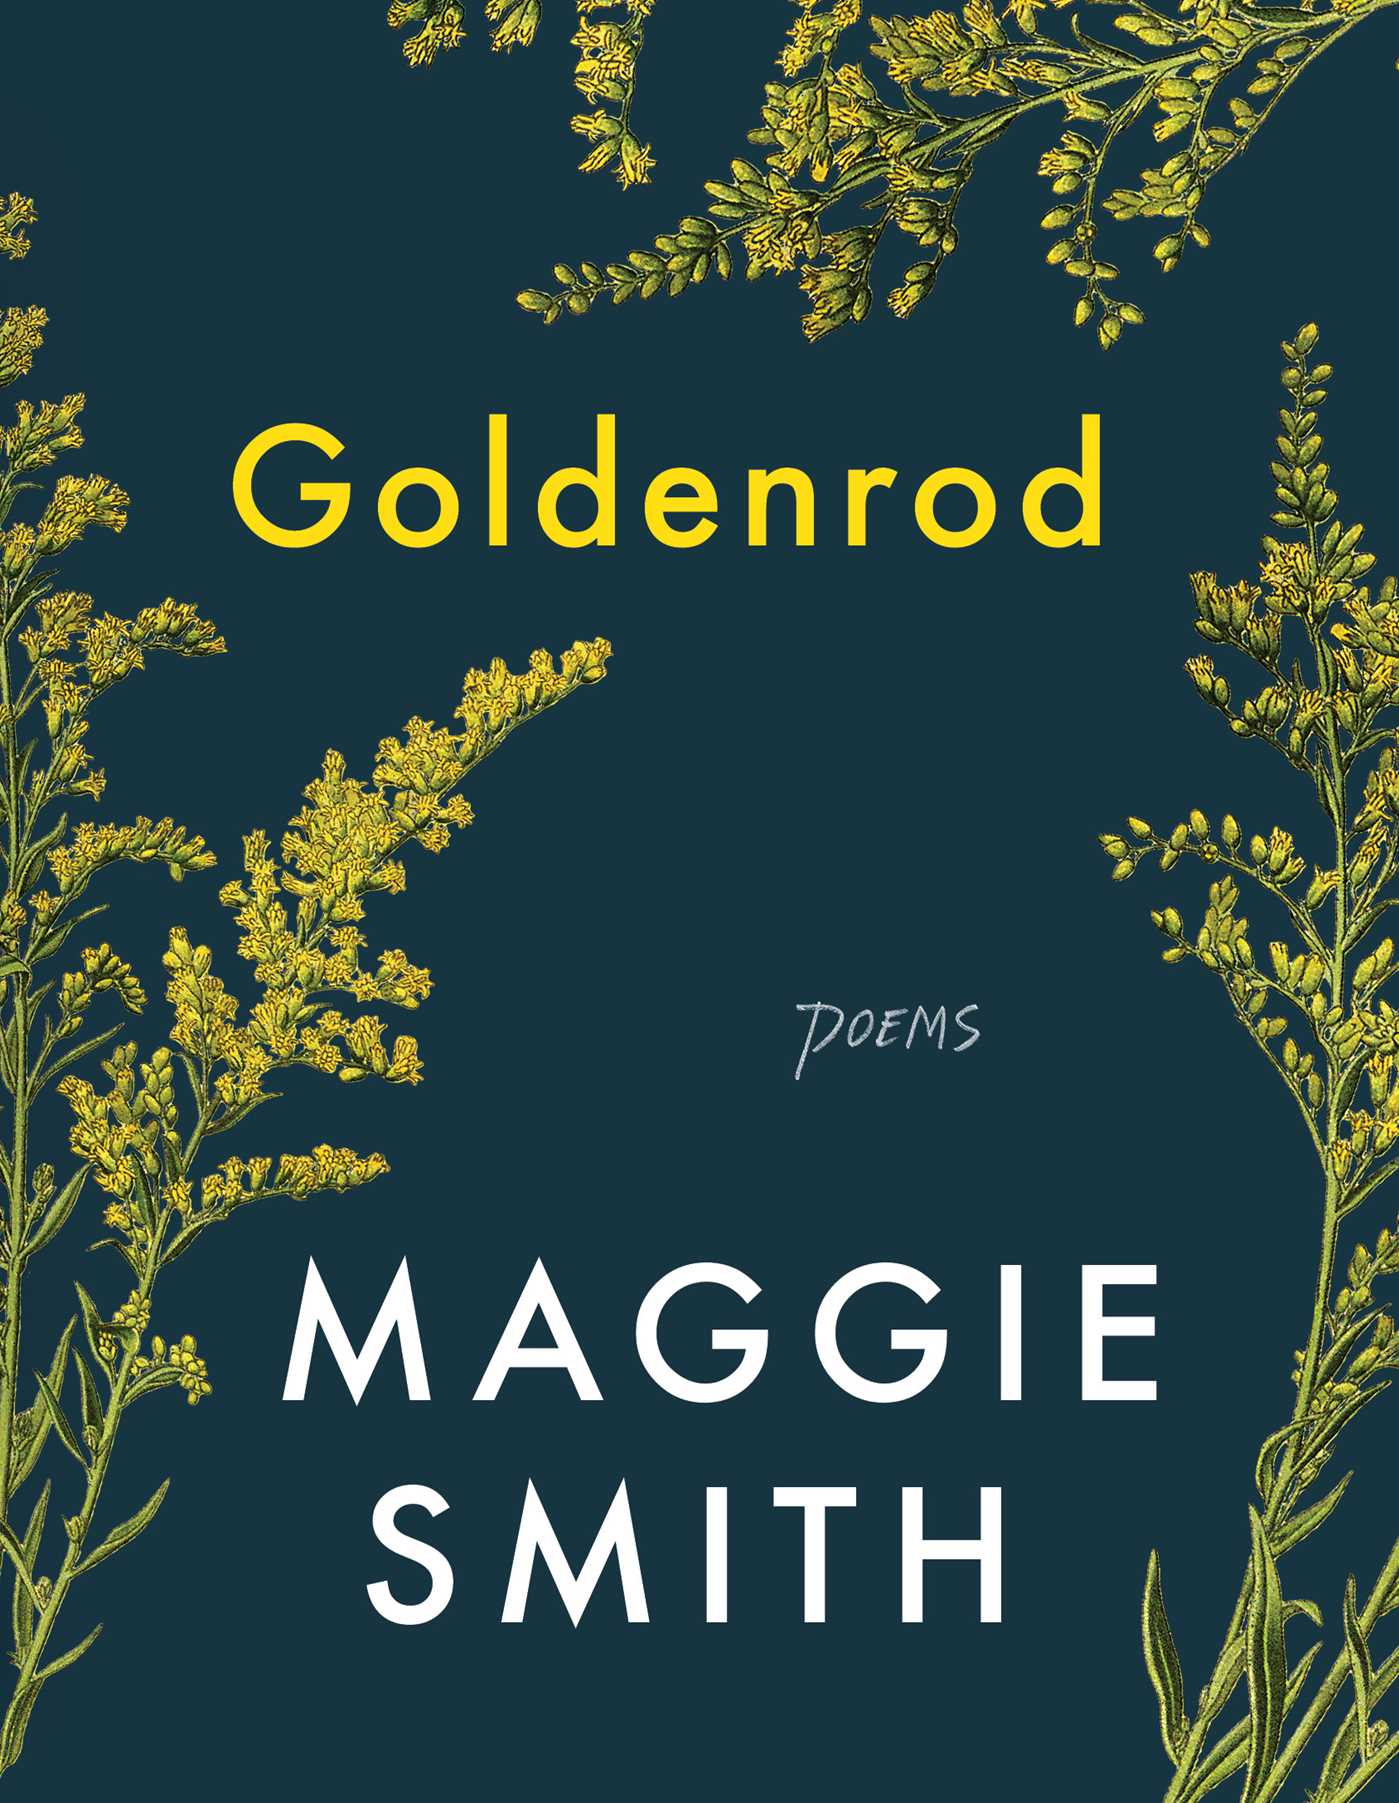 Goldenrod by Maggie Smith Free ePub Download